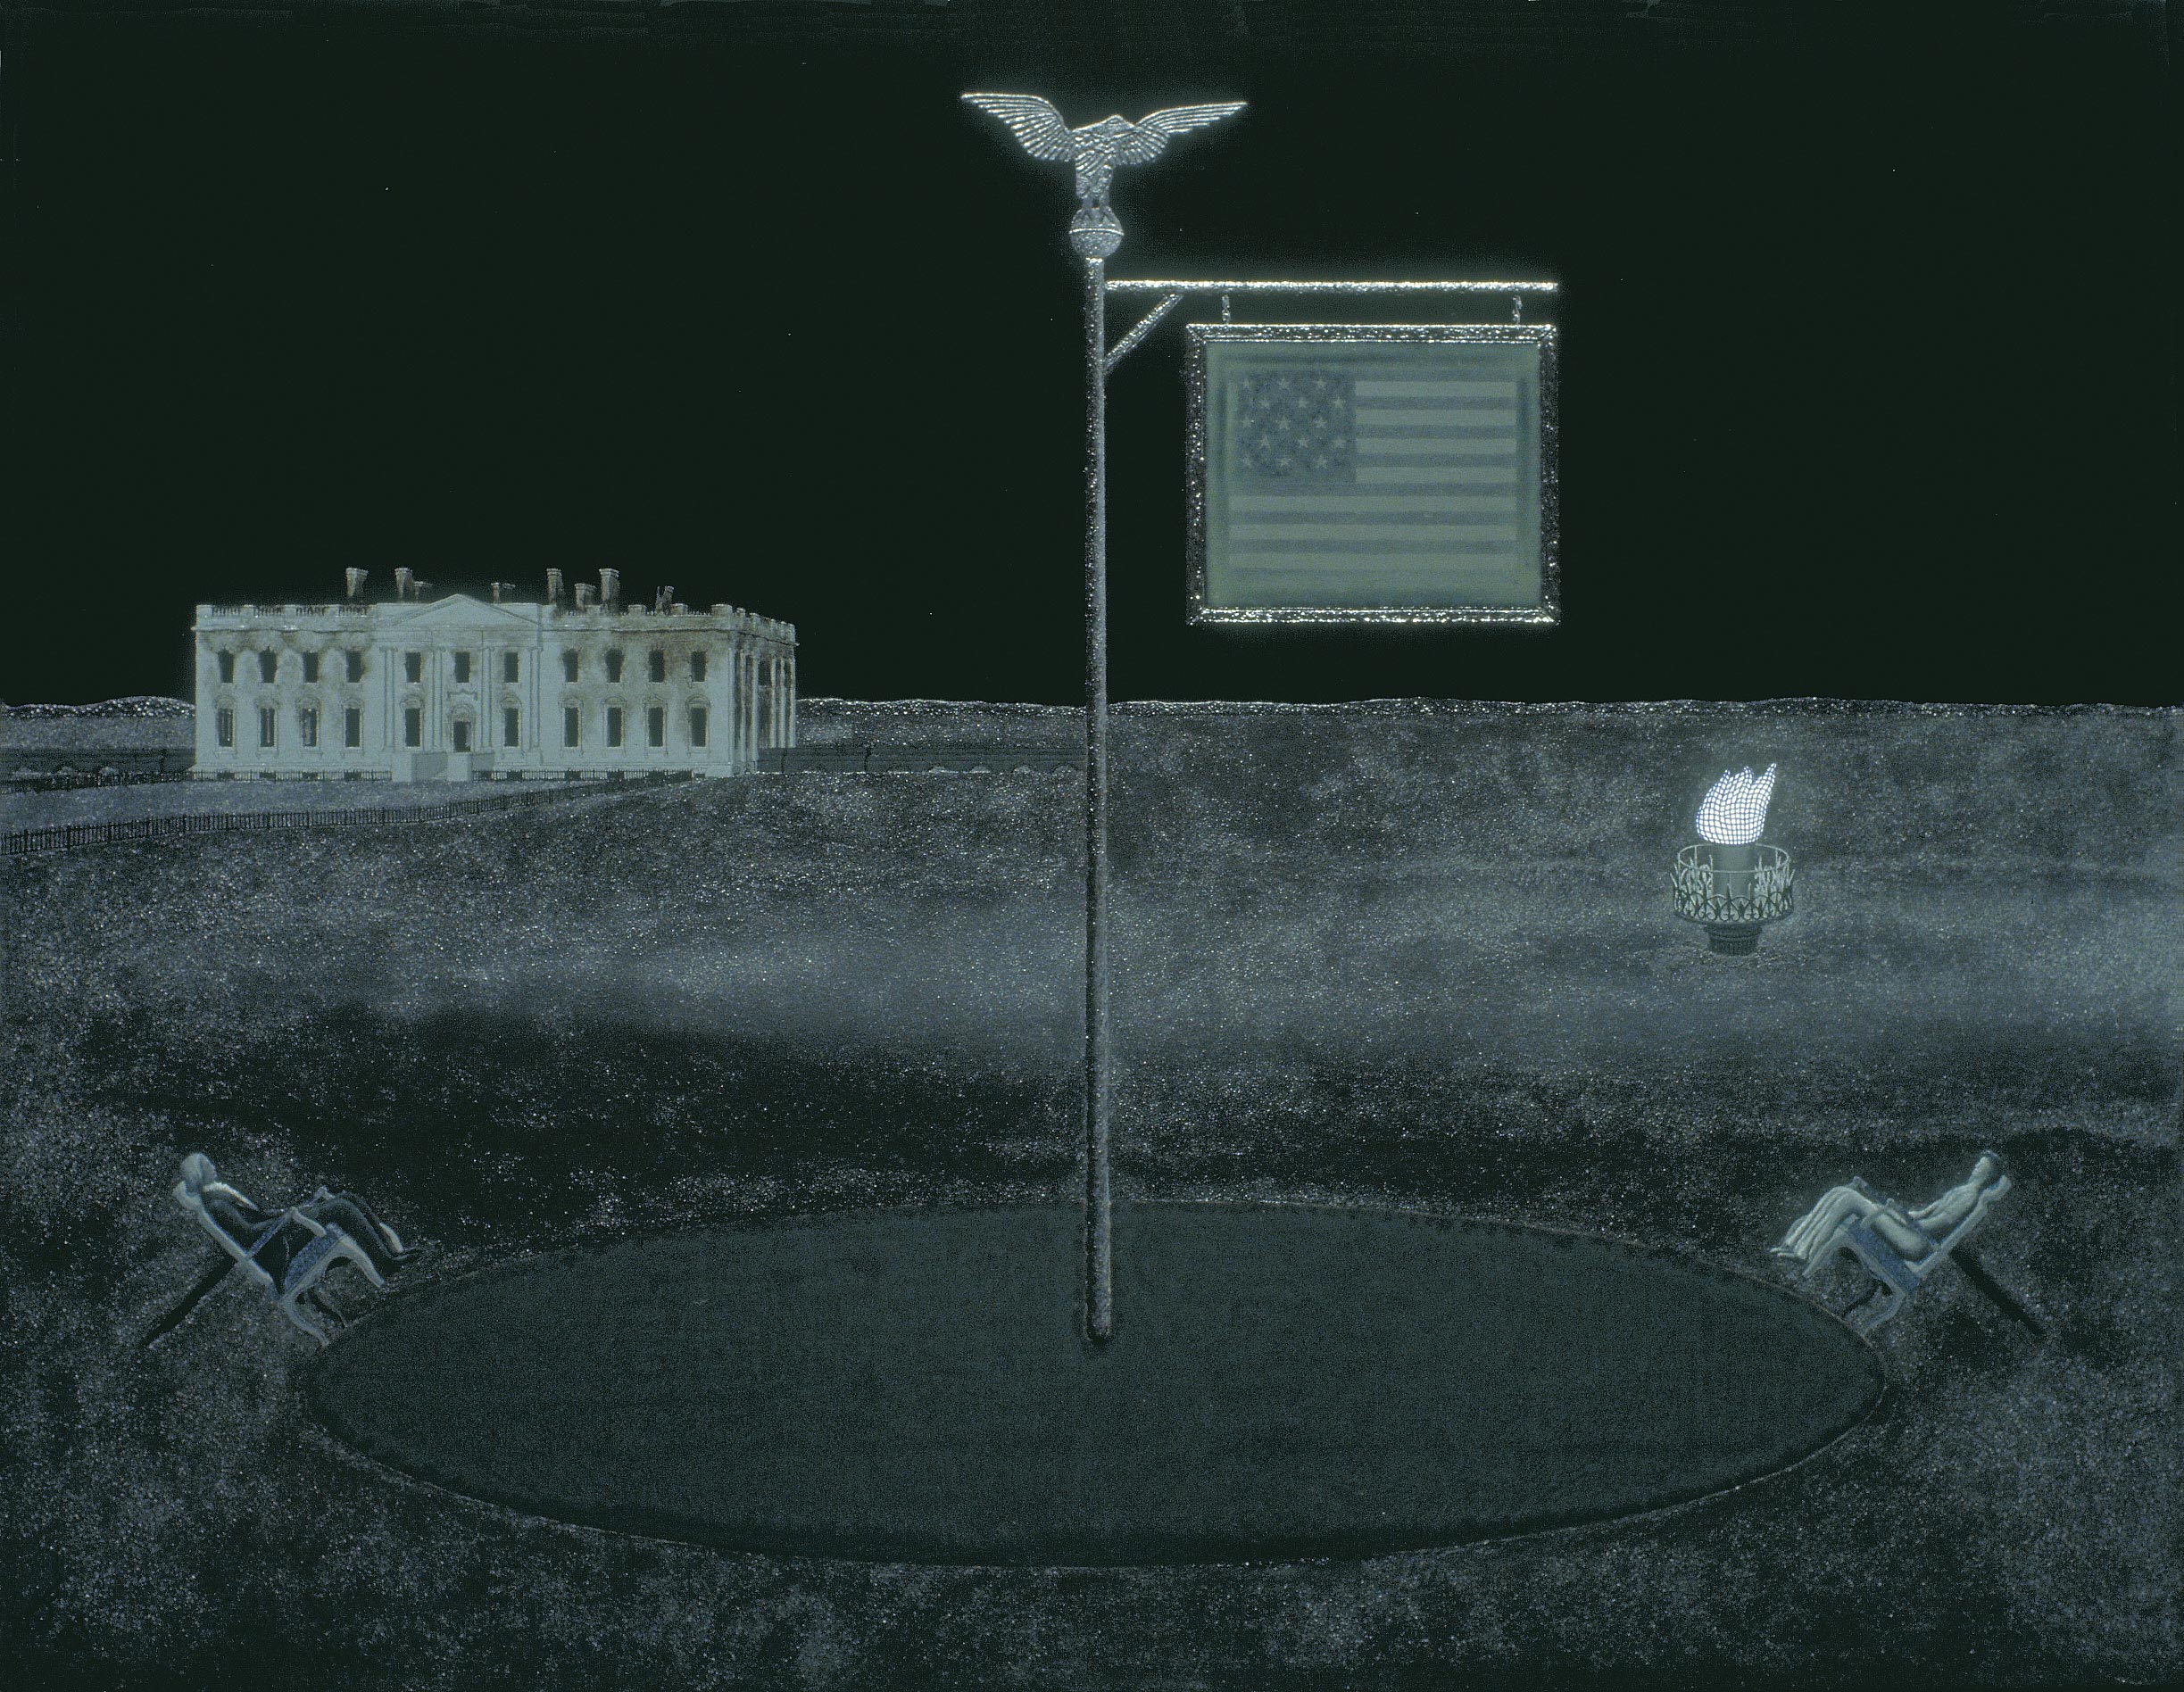 View of a darkened landscape, showing the White House and the torch from the Statue of Liberty behind a flagpole flanked by two seated figures, a man and a woman